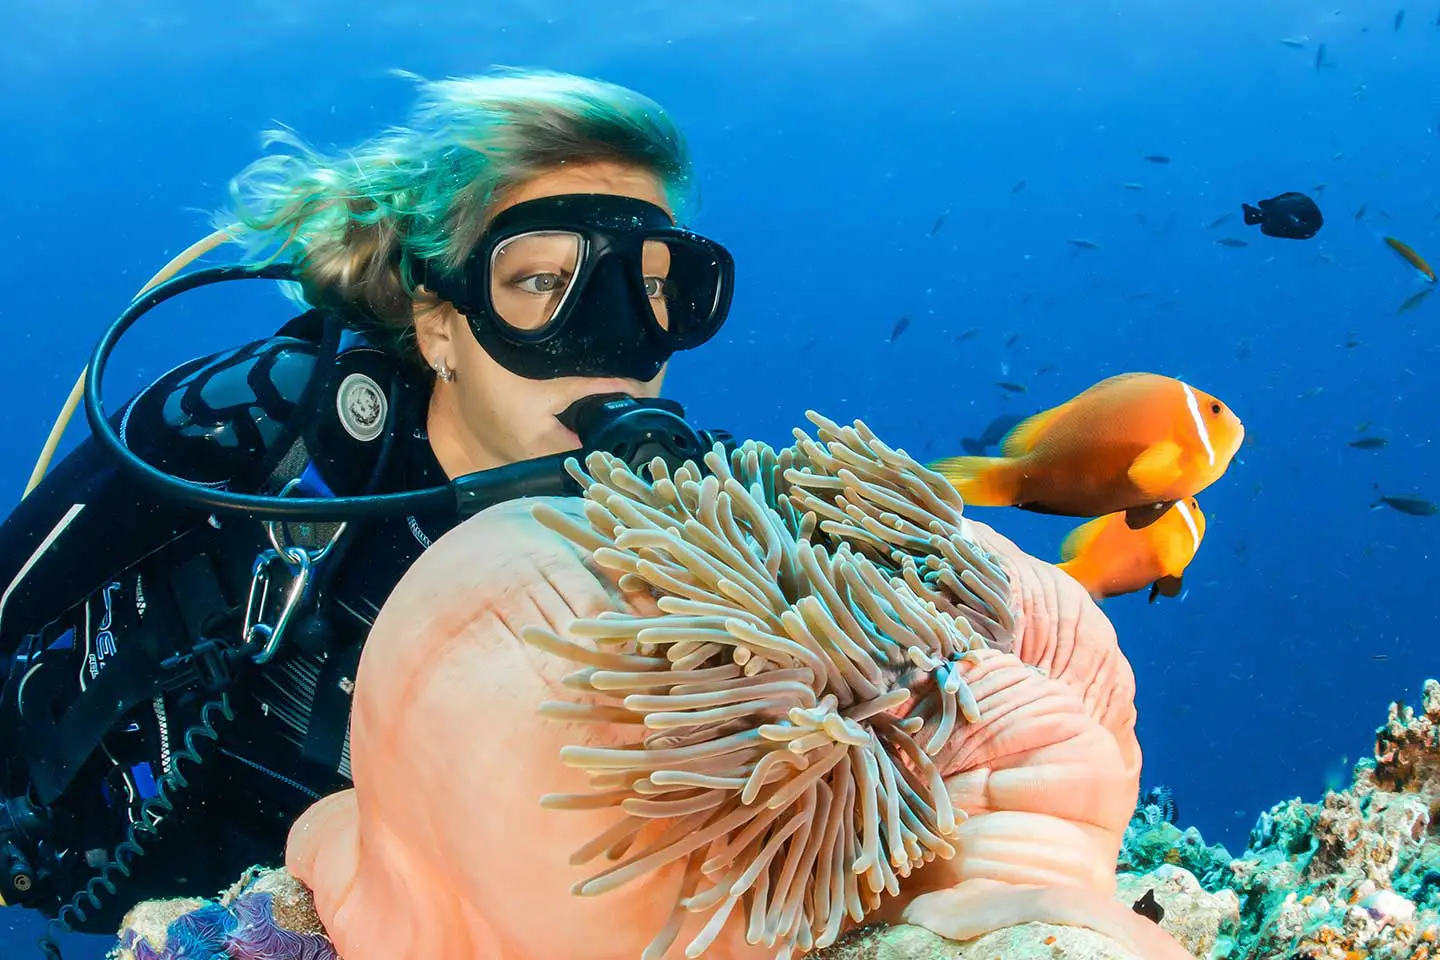 How to Take Underwater Photos of Divers: Woman Scuba Diver looking at anemonefish